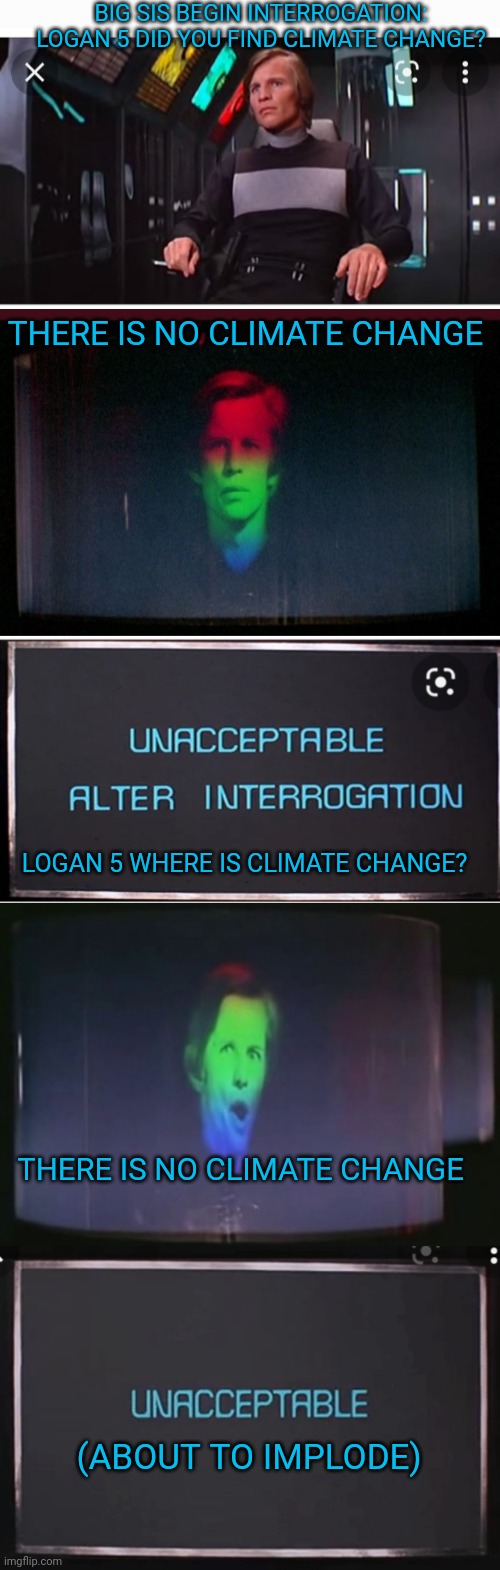 Logan's Run 2022 | BIG SIS BEGIN INTERROGATION: LOGAN 5 DID YOU FIND CLIMATE CHANGE? THERE IS NO CLIMATE CHANGE; LOGAN 5 WHERE IS CLIMATE CHANGE? THERE IS NO CLIMATE CHANGE; (ABOUT TO IMPLODE) | image tagged in classic,sci-fi,truth | made w/ Imgflip meme maker